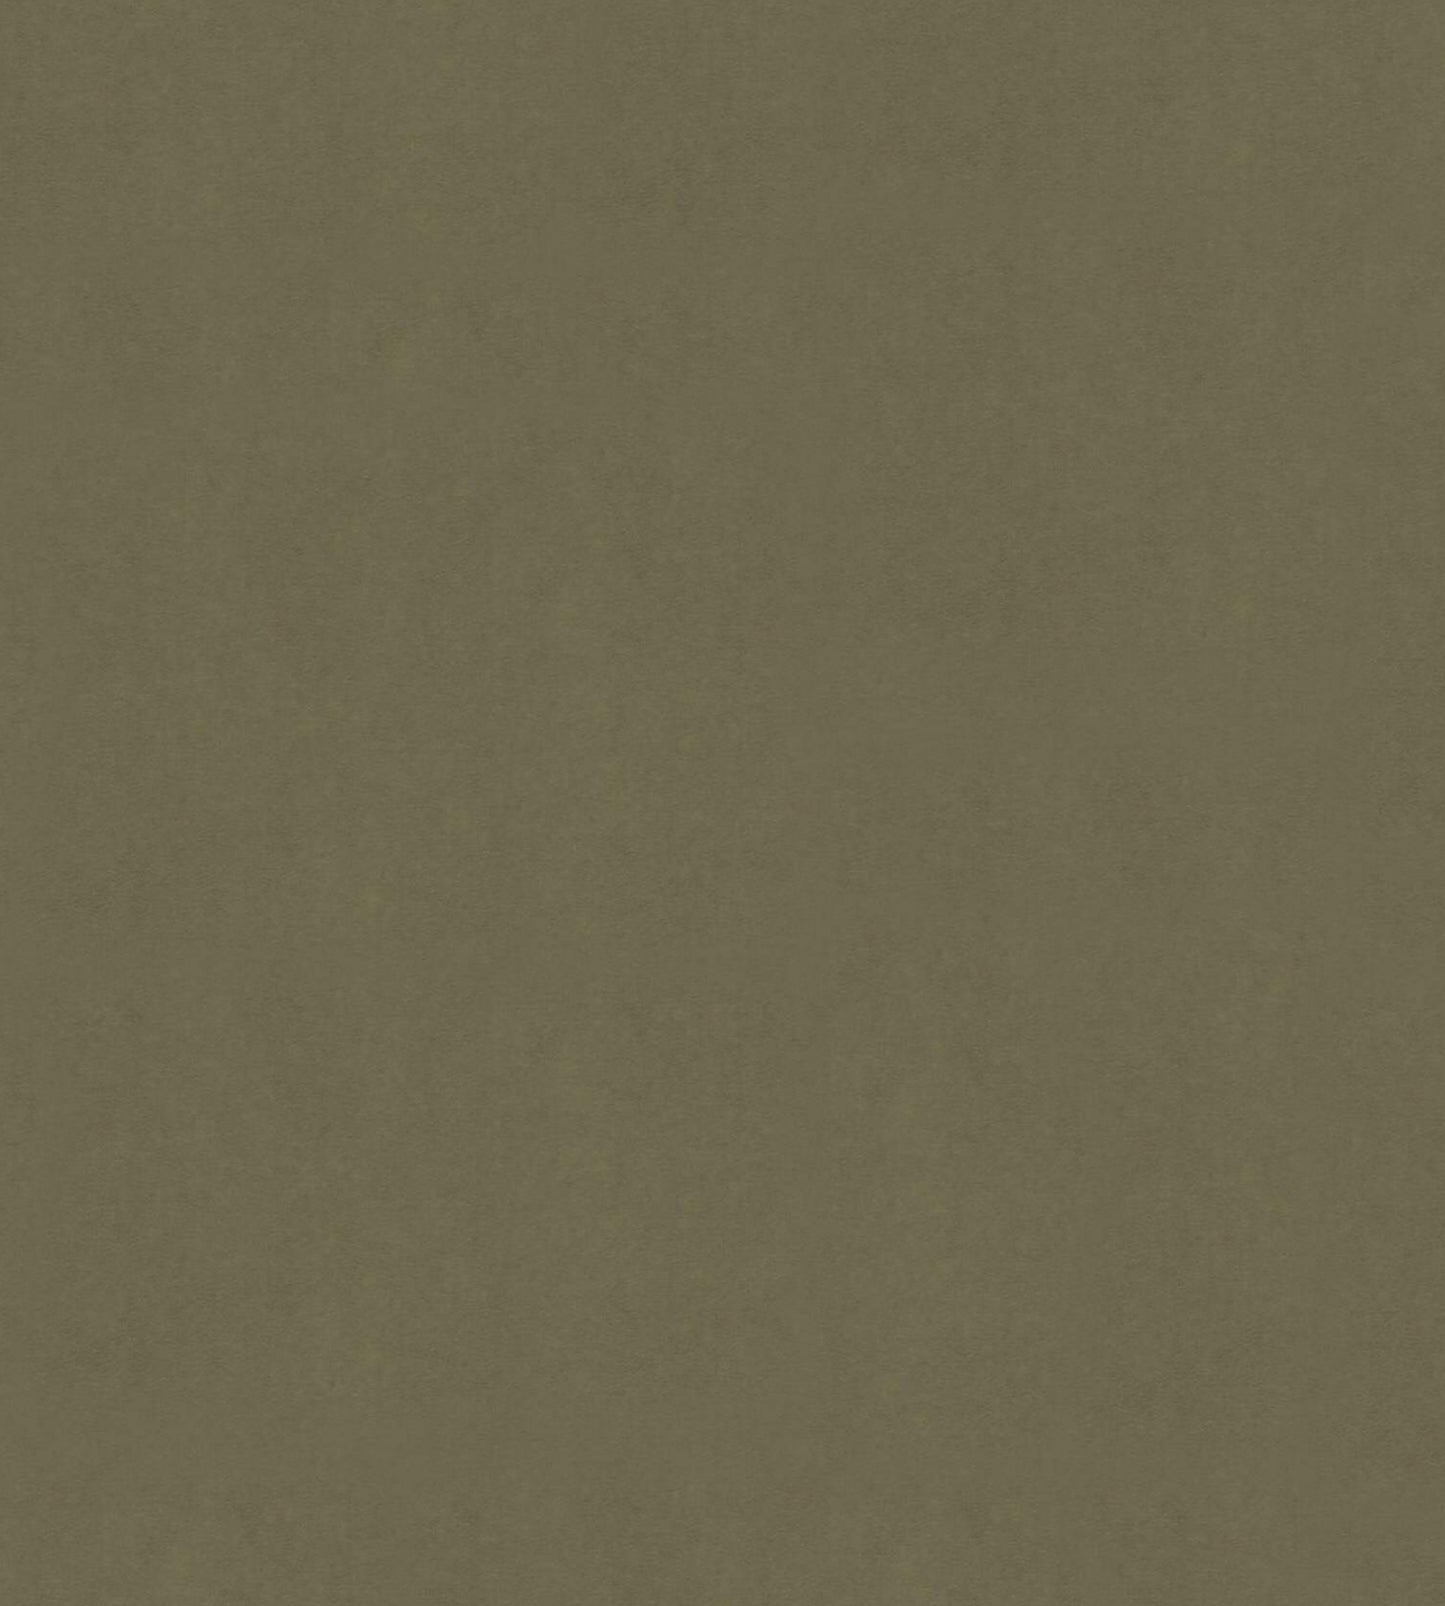 Purchase Old World Weavers Fabric Pattern AB 10461000, Sensuede Verde 1